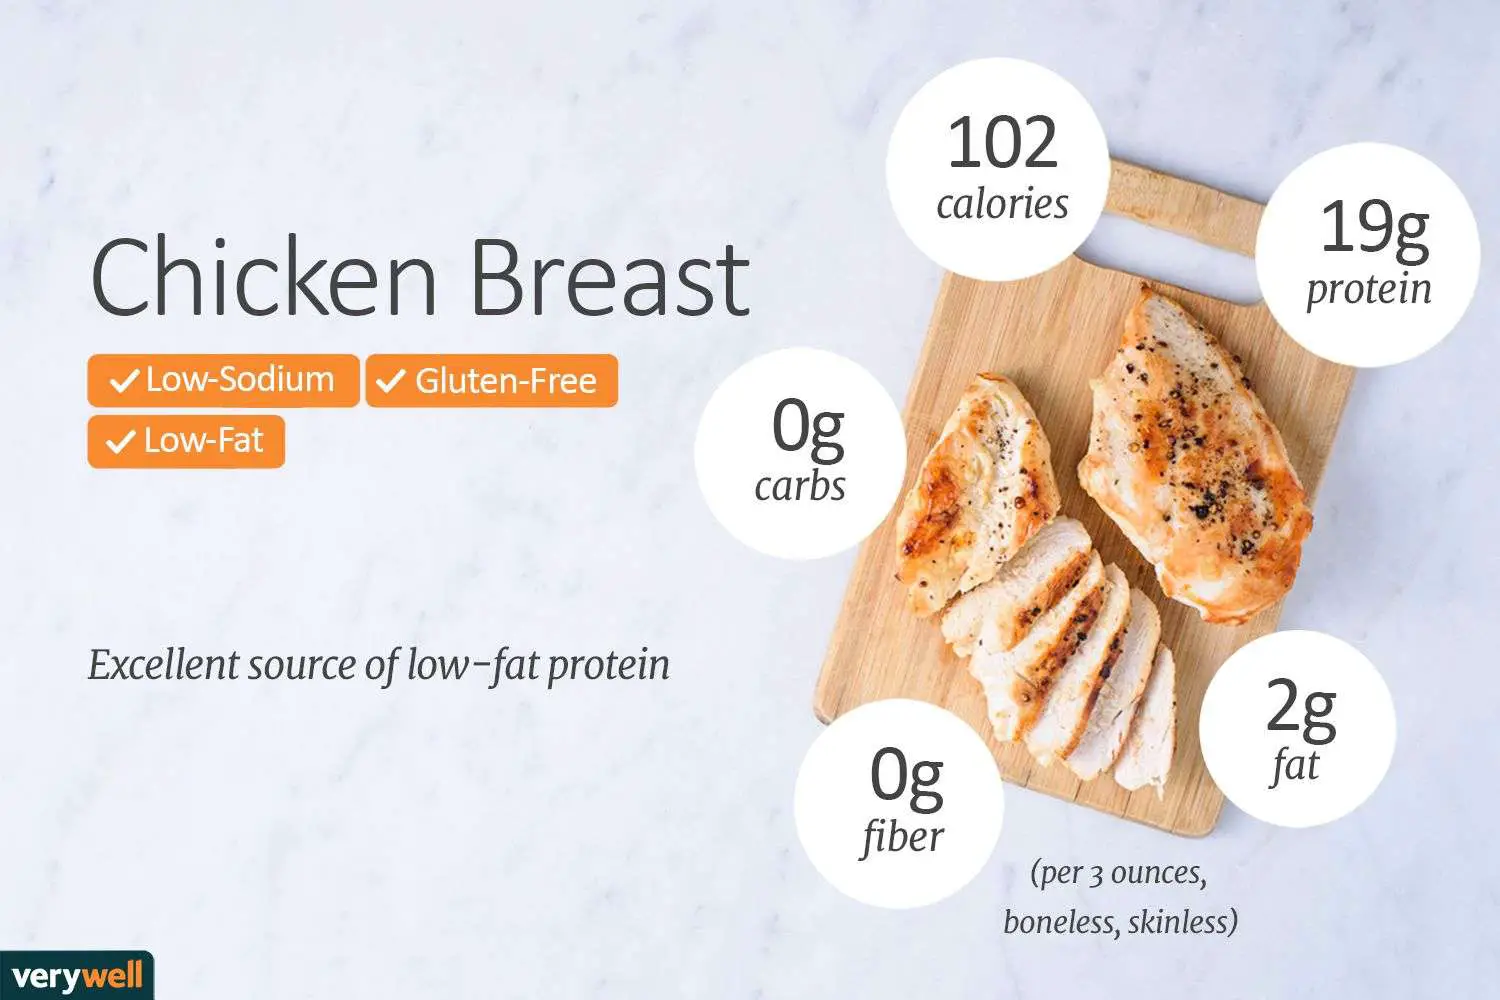 Chicken Breast Calories, Nutrition, and Health Benefits